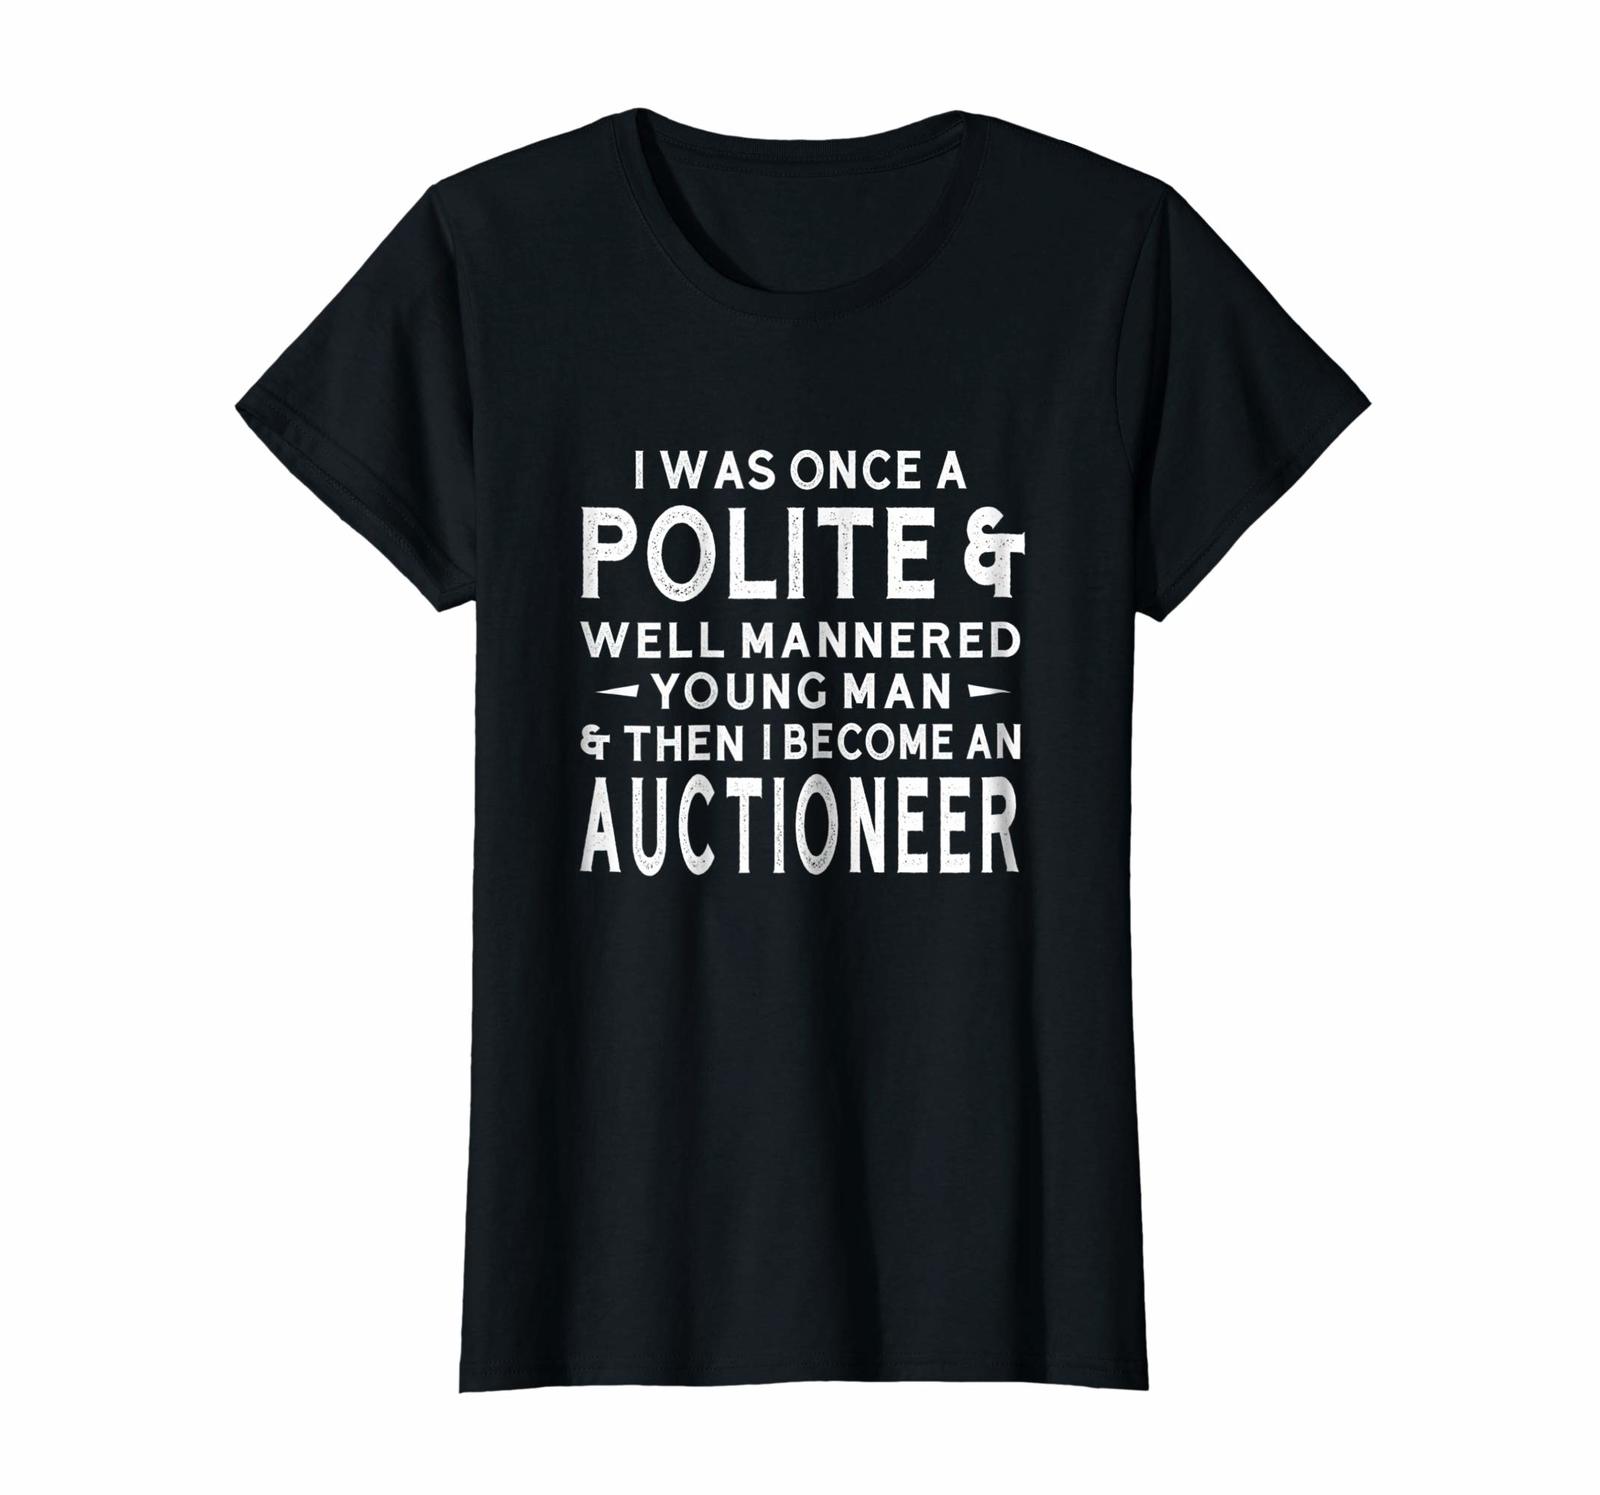 Dog Fashion - I Was Once A Polite & Mannered Man Auctioneer T-Shirt Funny Wo